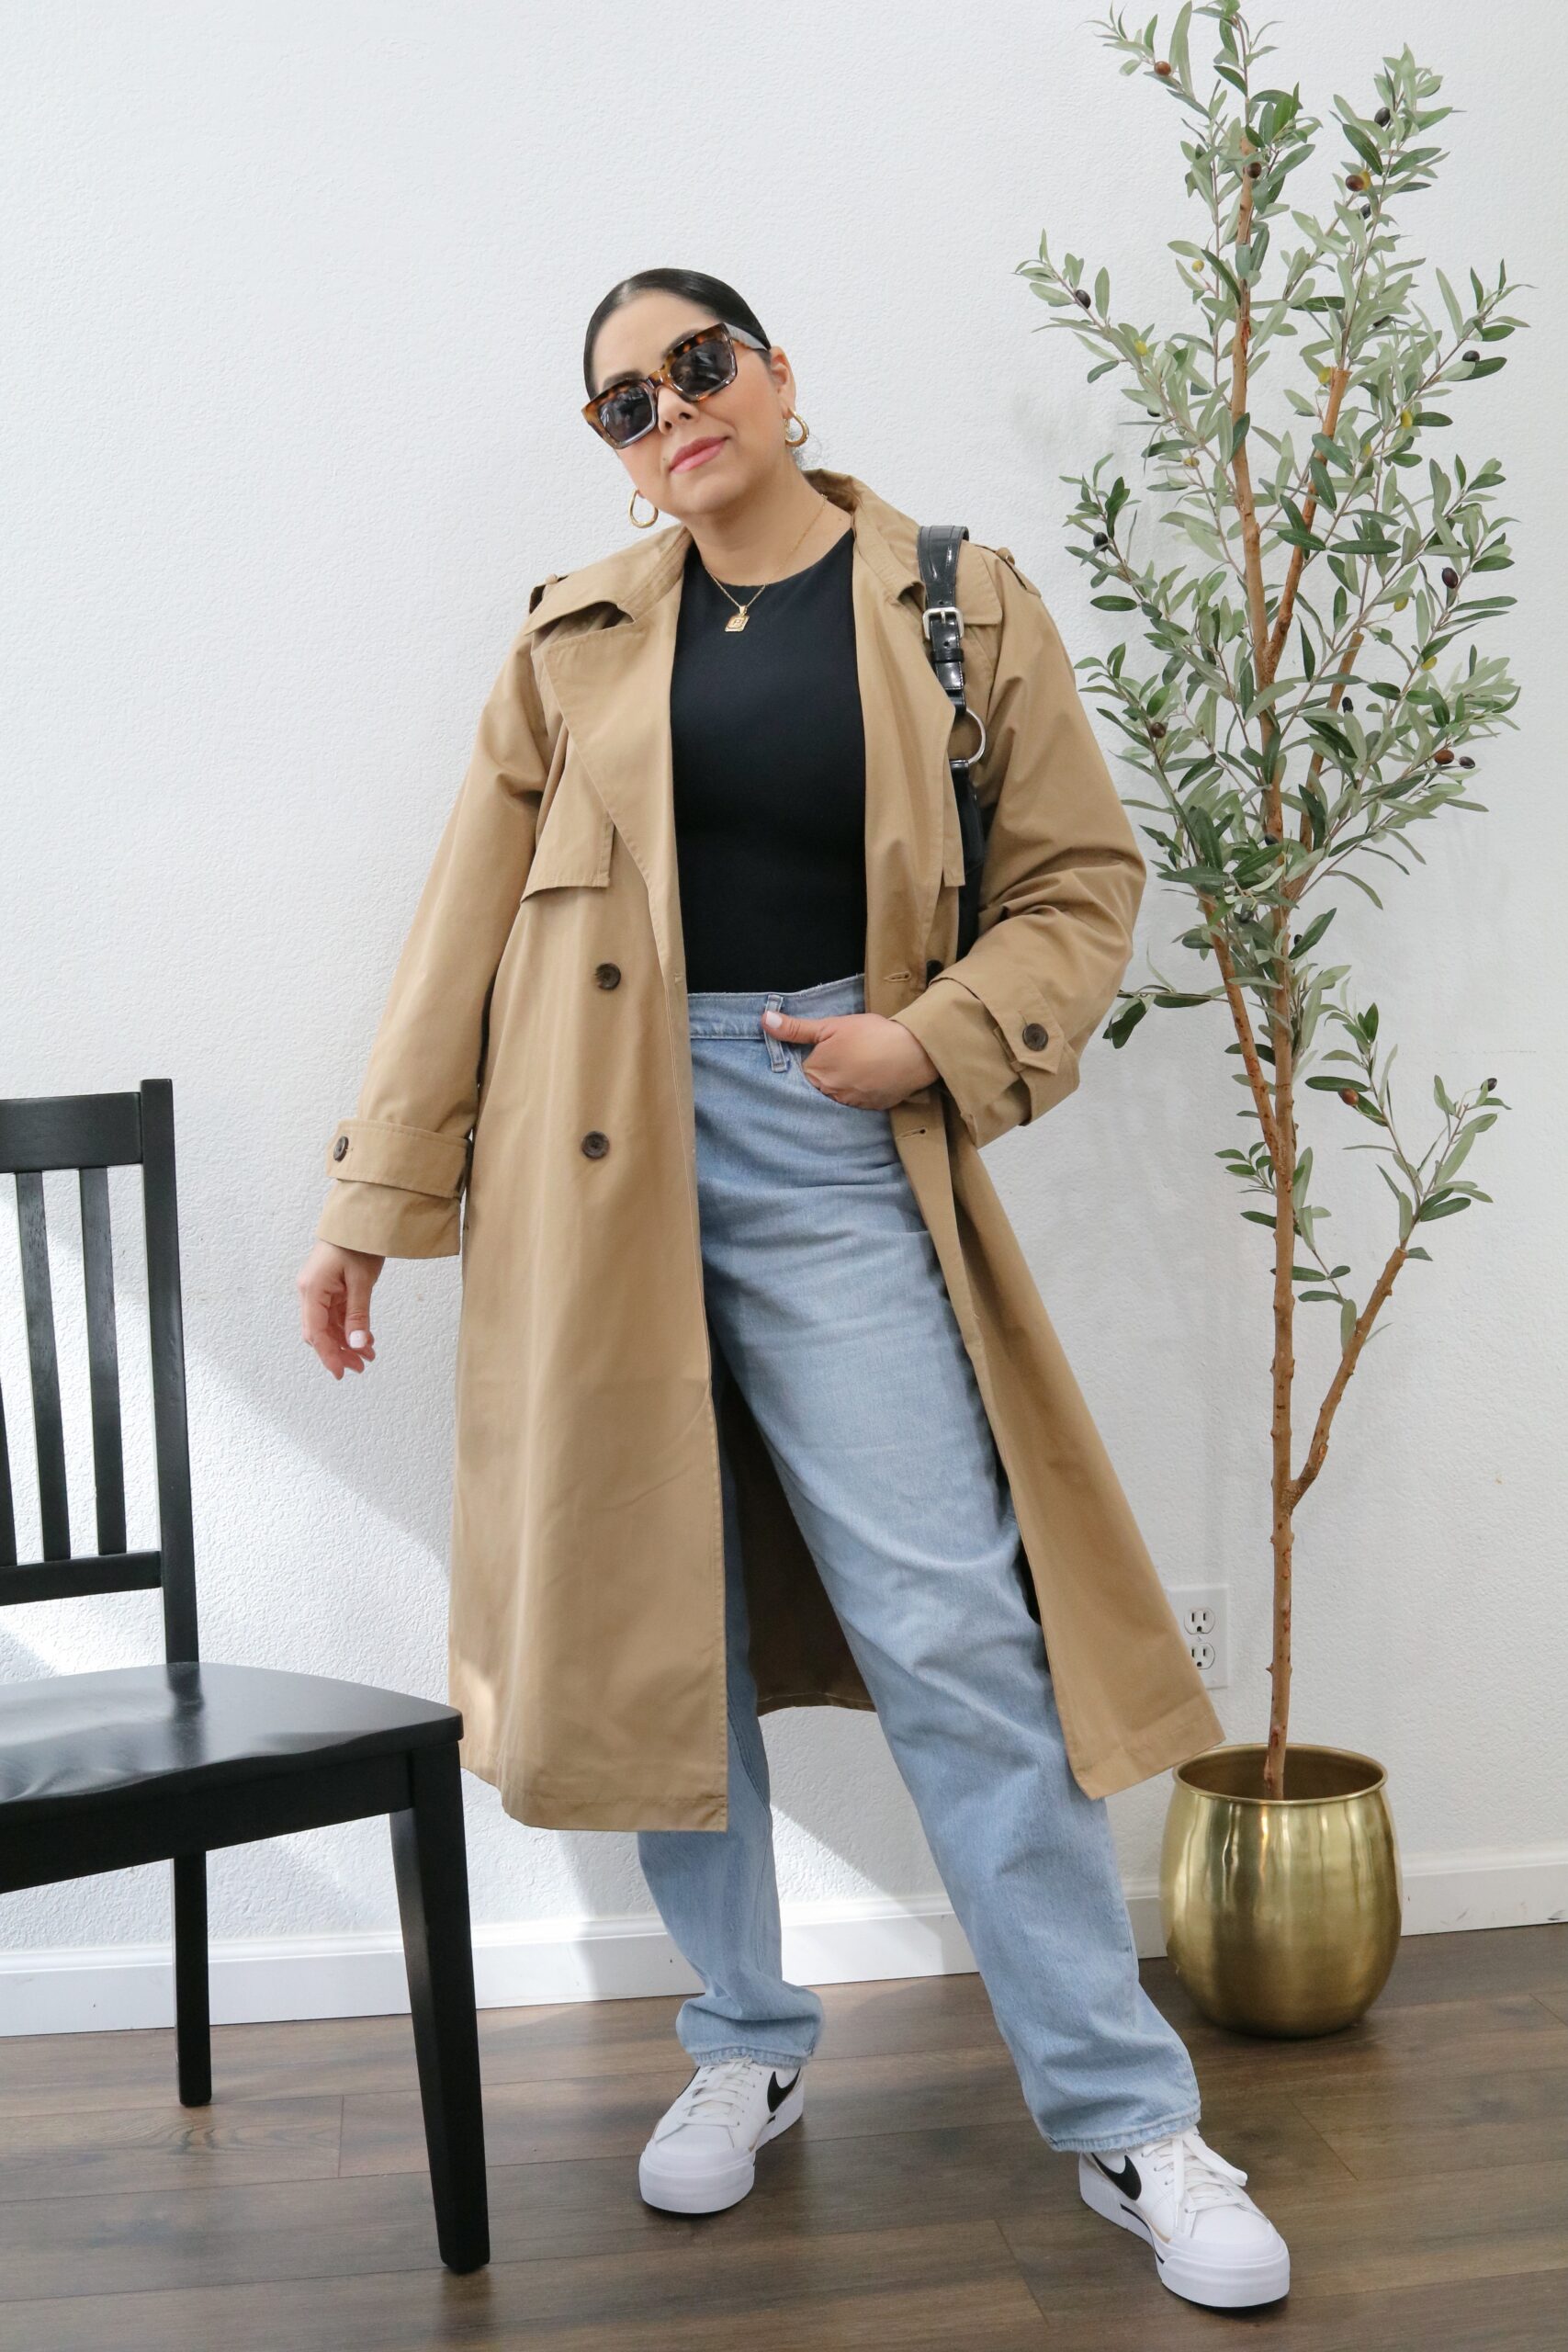 5 Ways to Style a Trench Coat - Chic Trench Coat Outfit Ideas